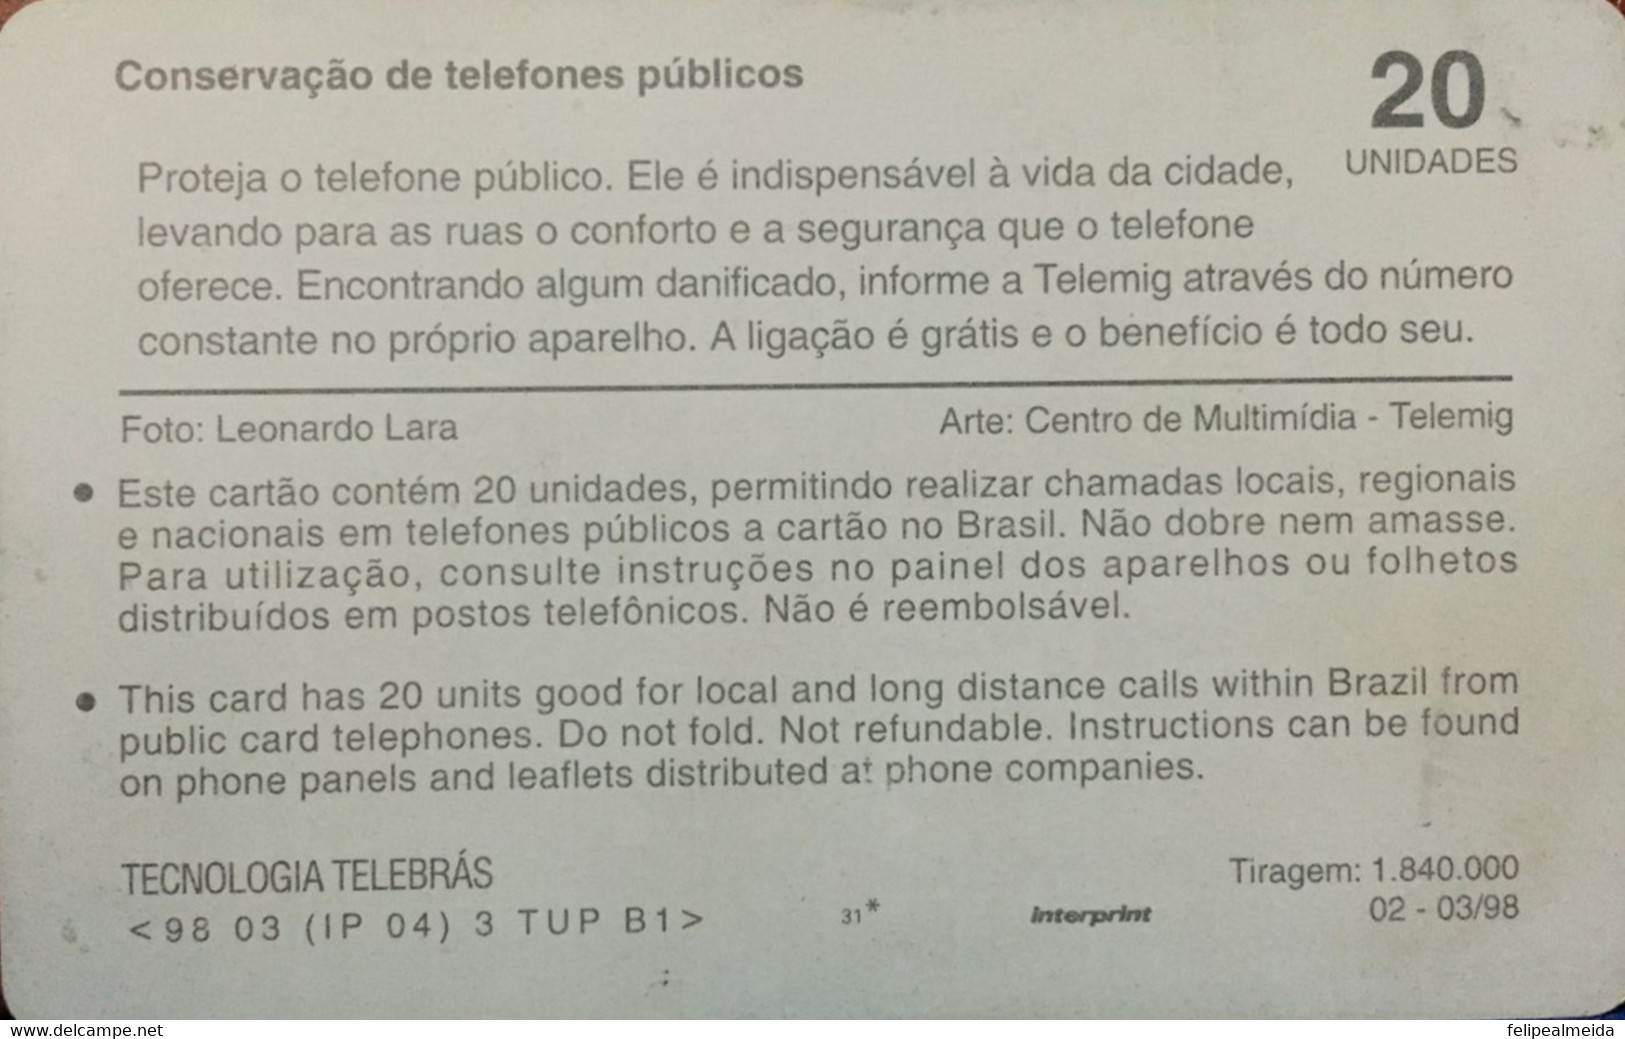 Phone Card Manufactured By Telebras In 1998 - Advertising Campaign For The Conservation Of Public Telephones - Telecom